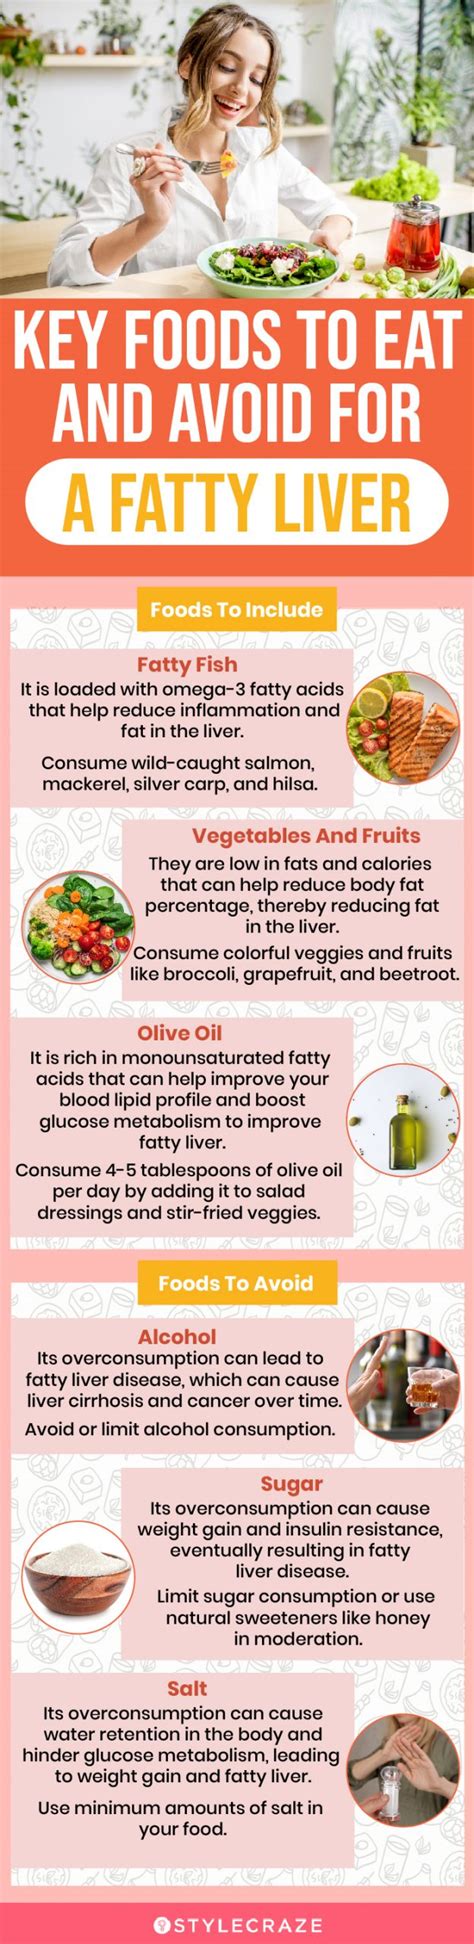 Fatty Liver Diet Plan And Foods To Eat And Avoid